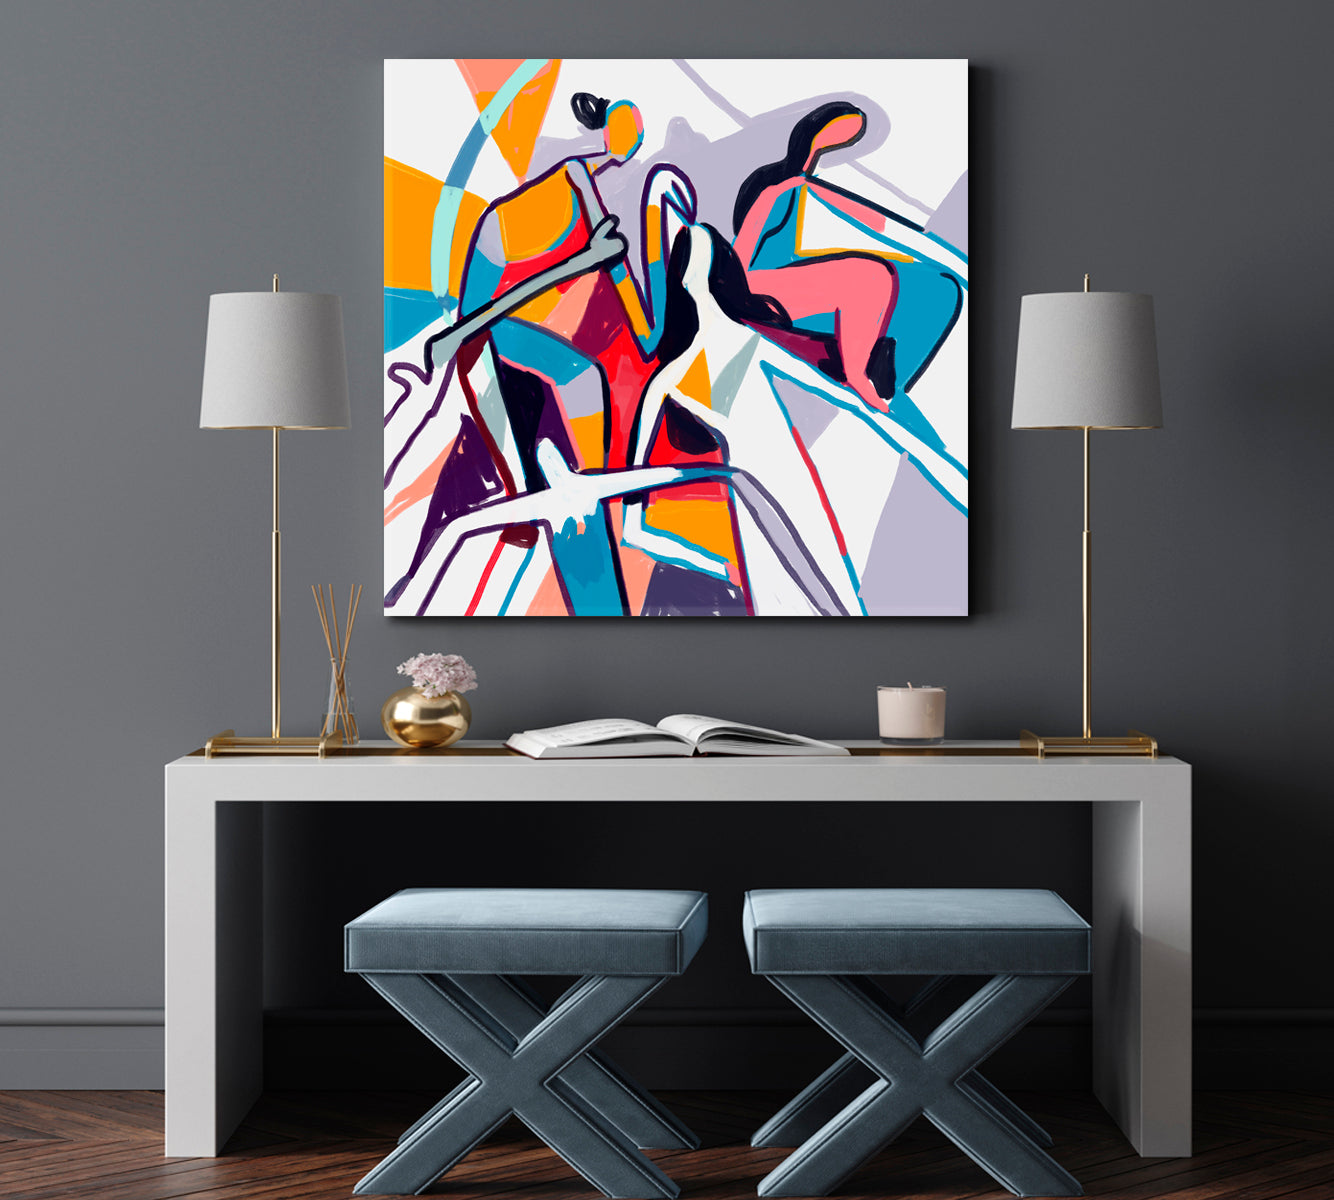 Inspired By Piet Mondrian and Keith Haring Contemporary Art Abstract Art Print Artesty 1 Panel 12"x12" 